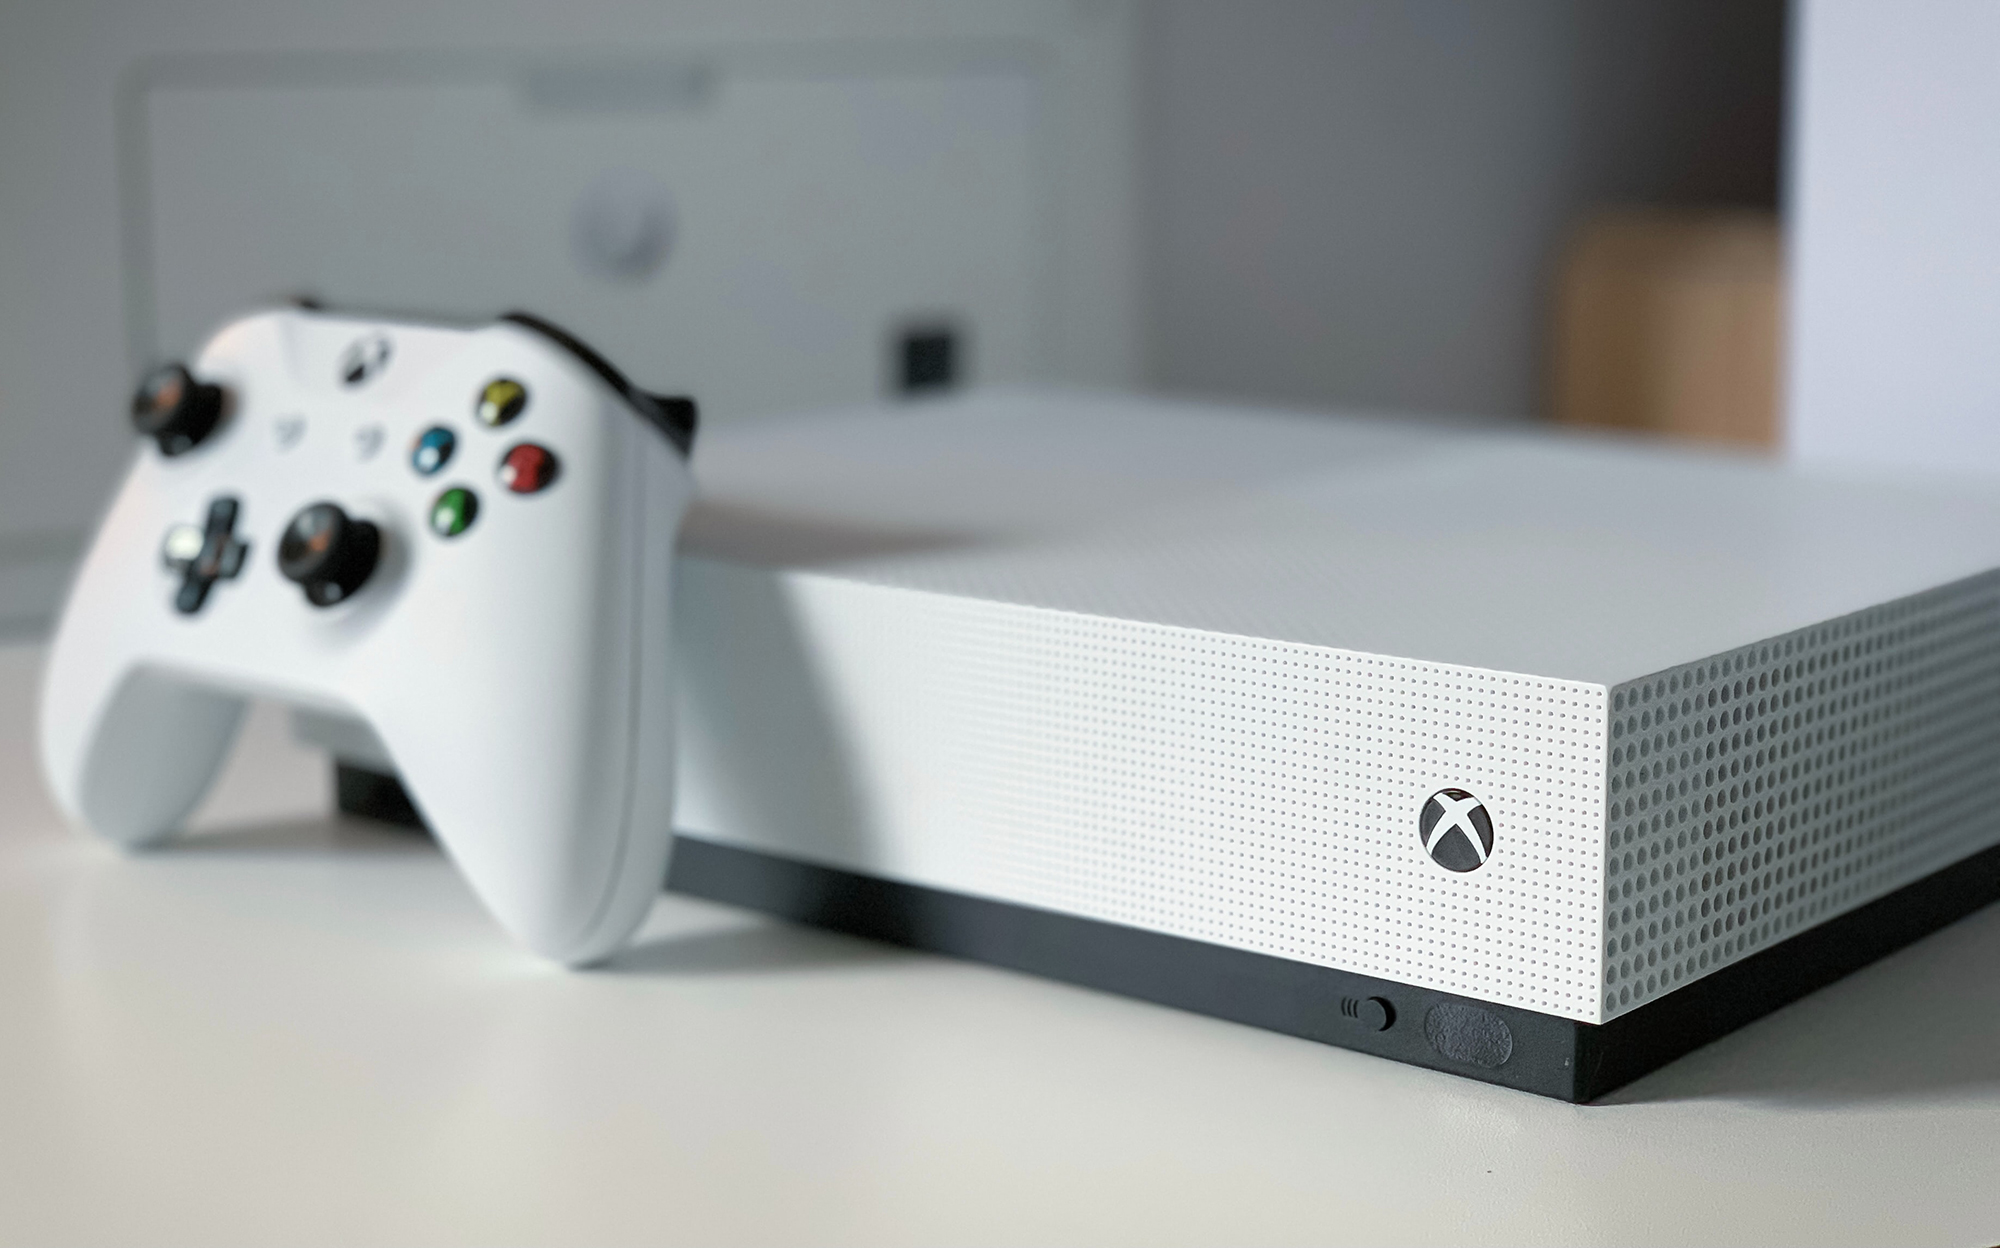 Save $50 on the Xbox Series S with 3 months of Game Pass